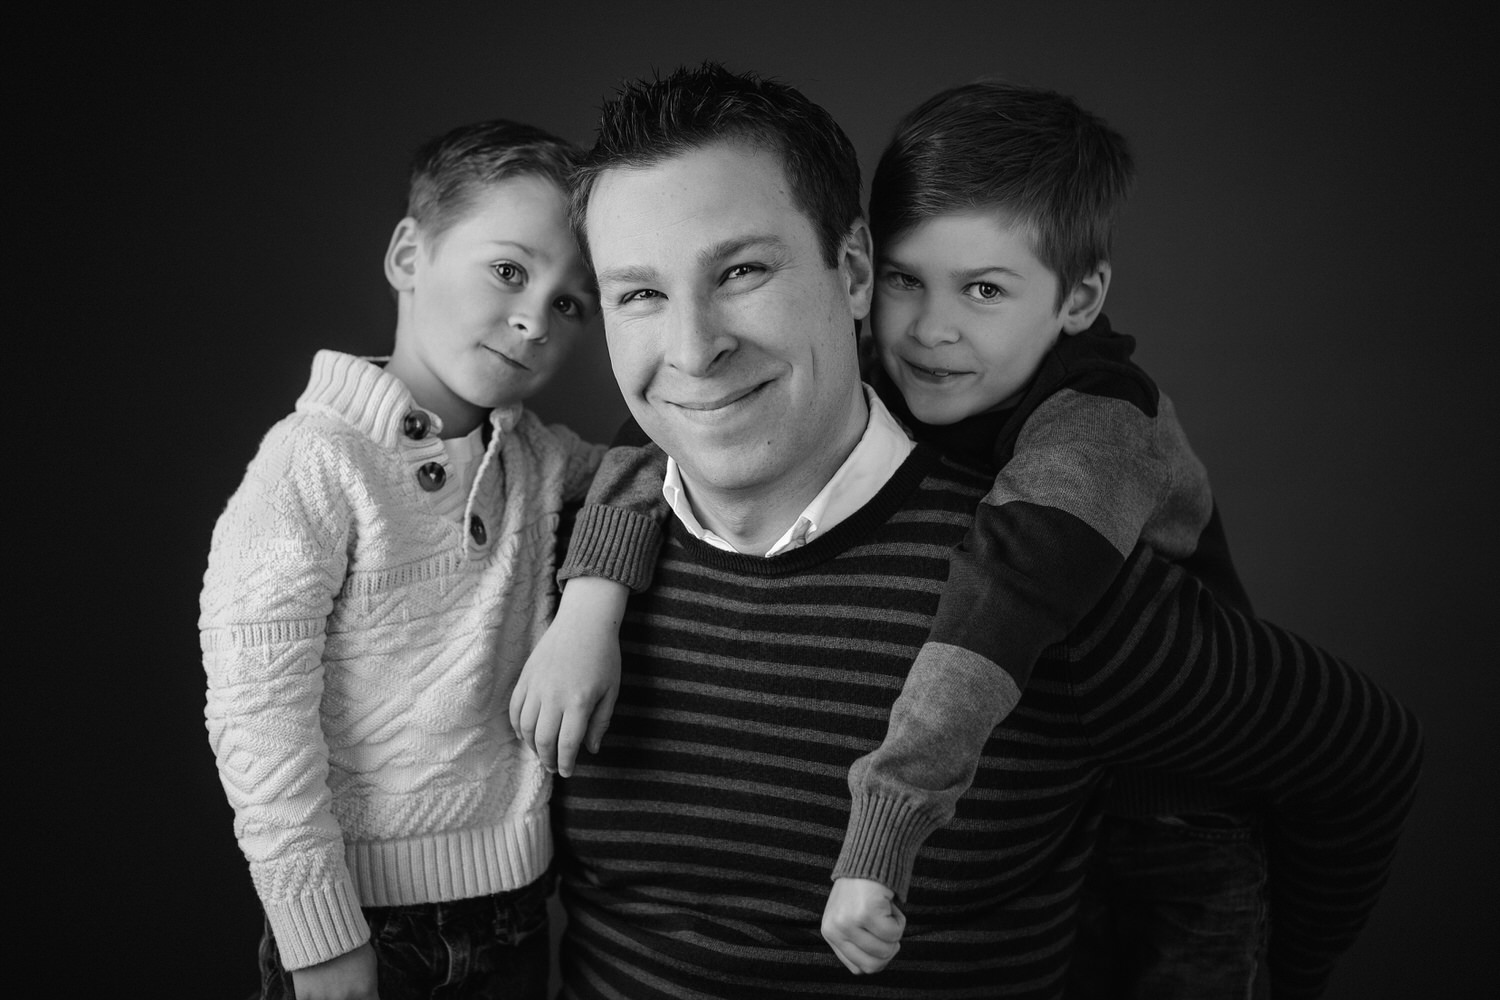 Dad and his two sons pose for a family portrait photographed in Calgary's best photography studio